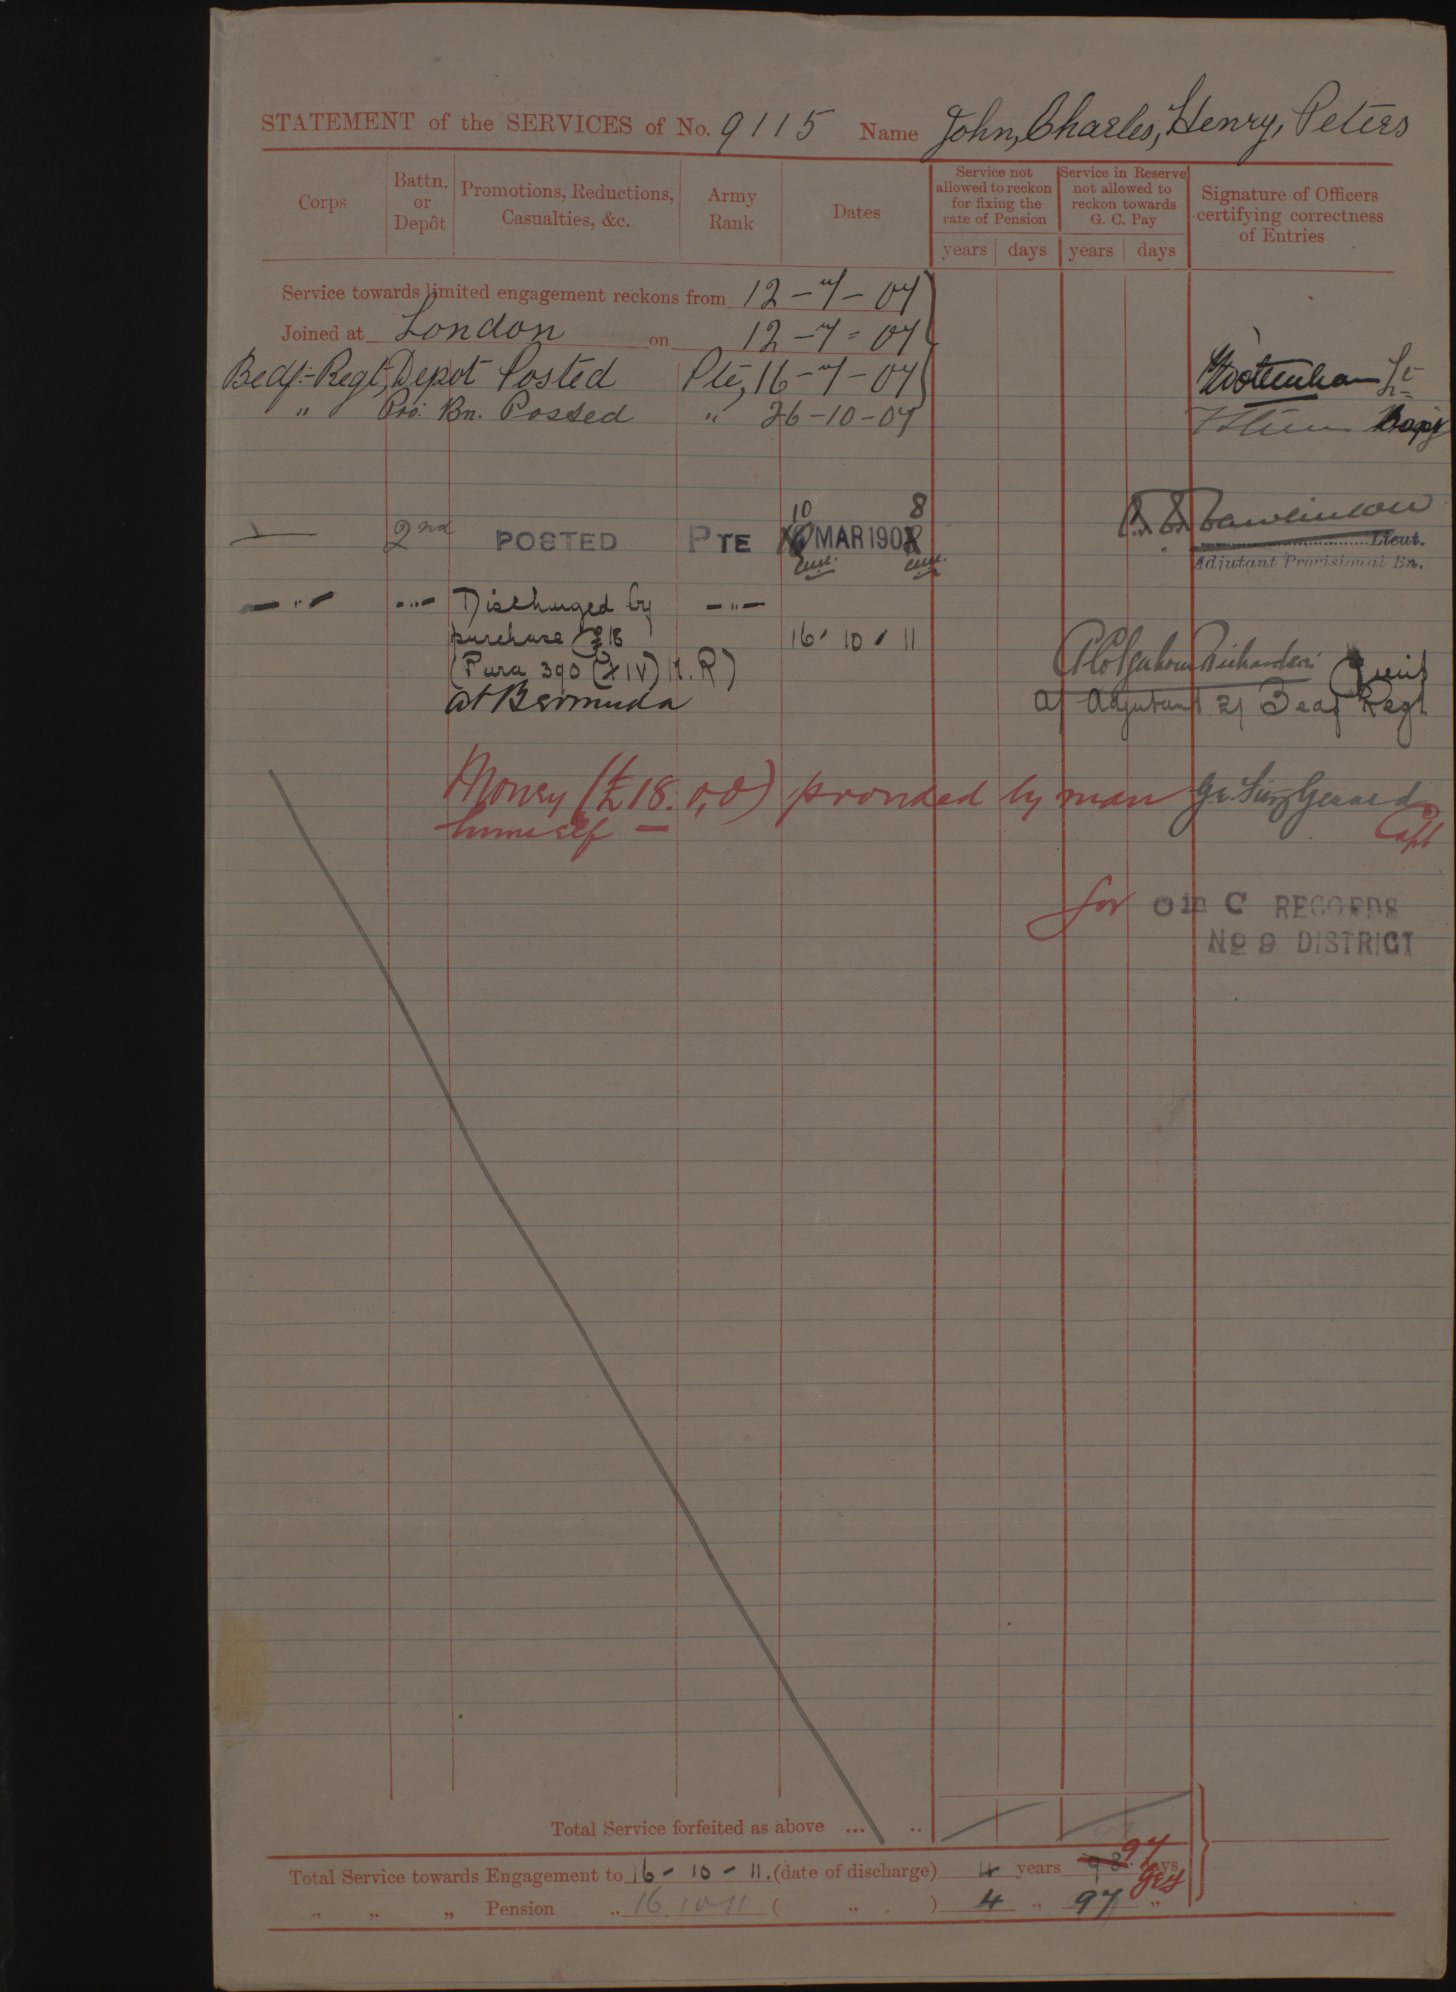 John Peters army records show he was discharged at the cost of £18 in 1911 at Bermuda. He had served in the Bedford Regiment.